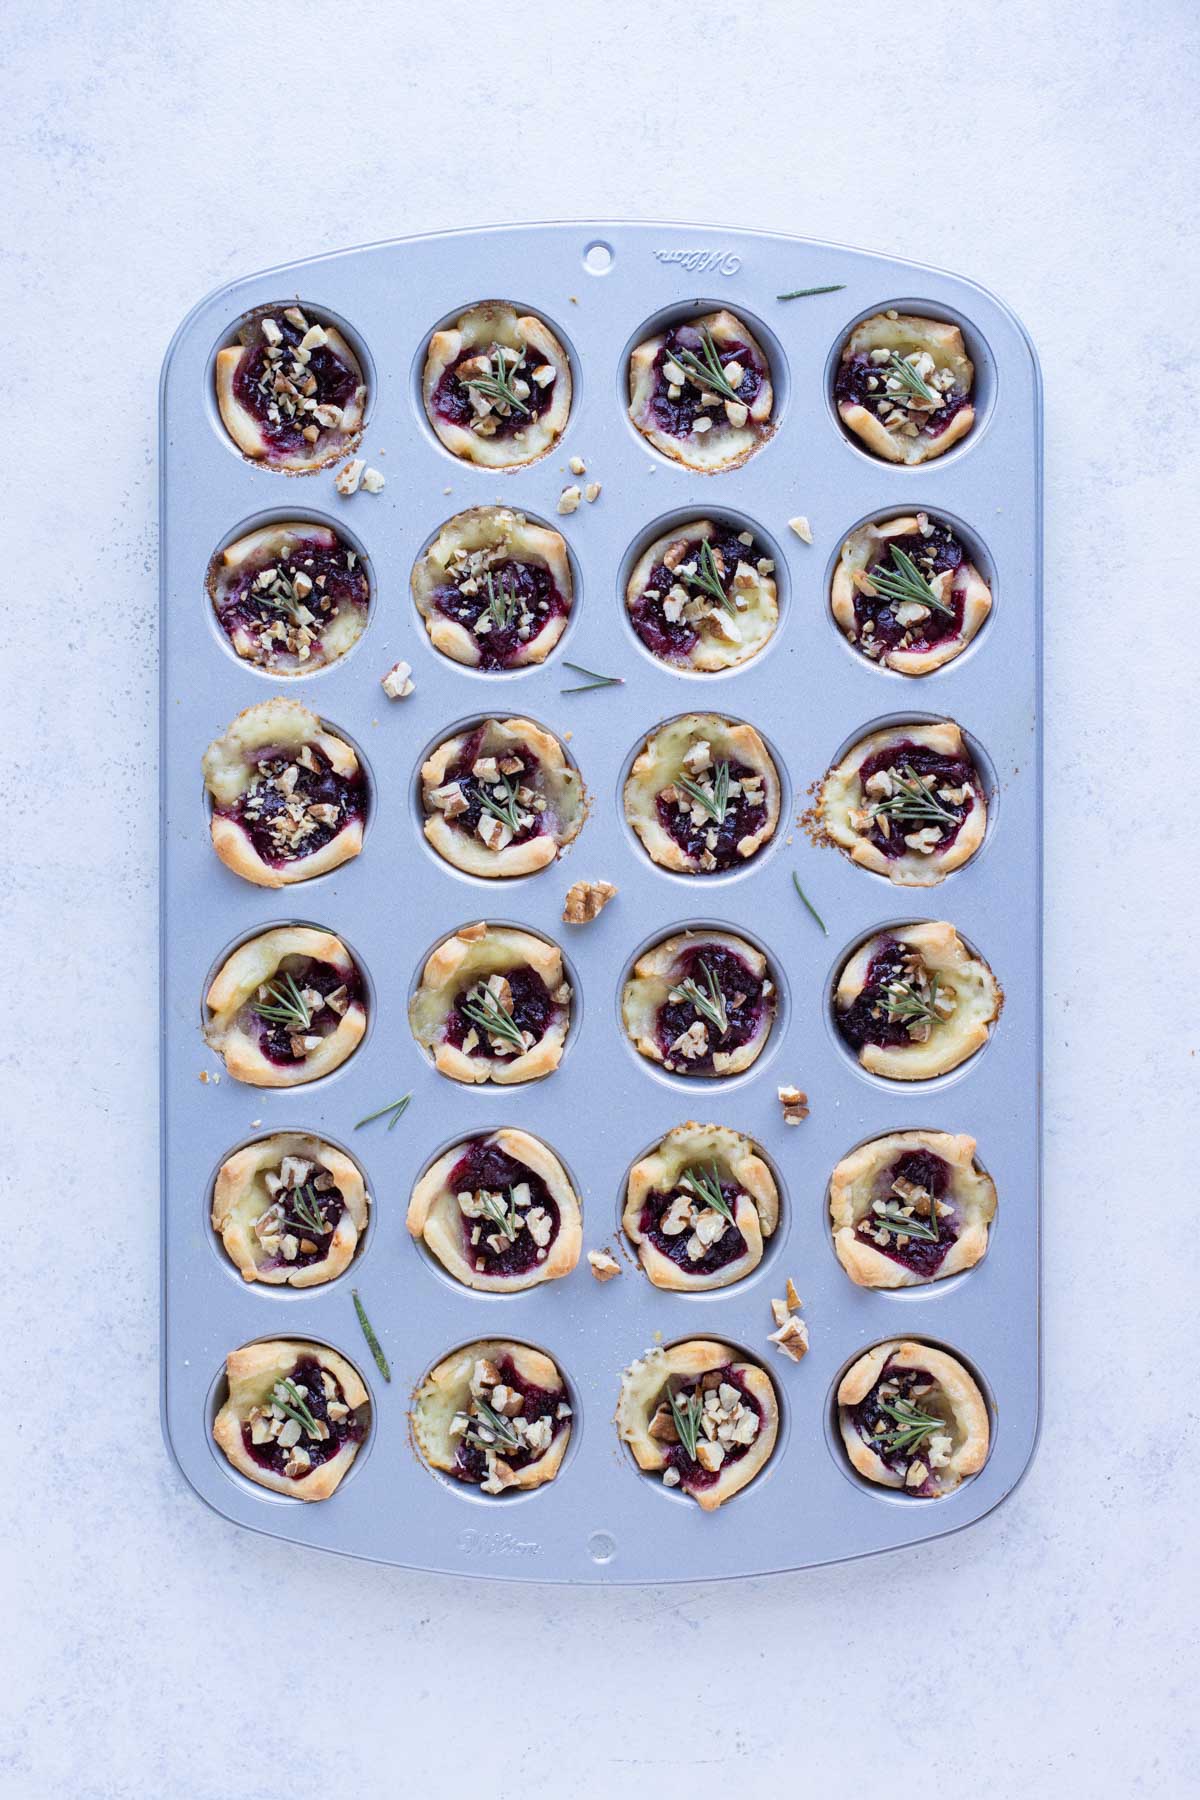 Baked brie bites are topped with toasted pecans and rosemary.